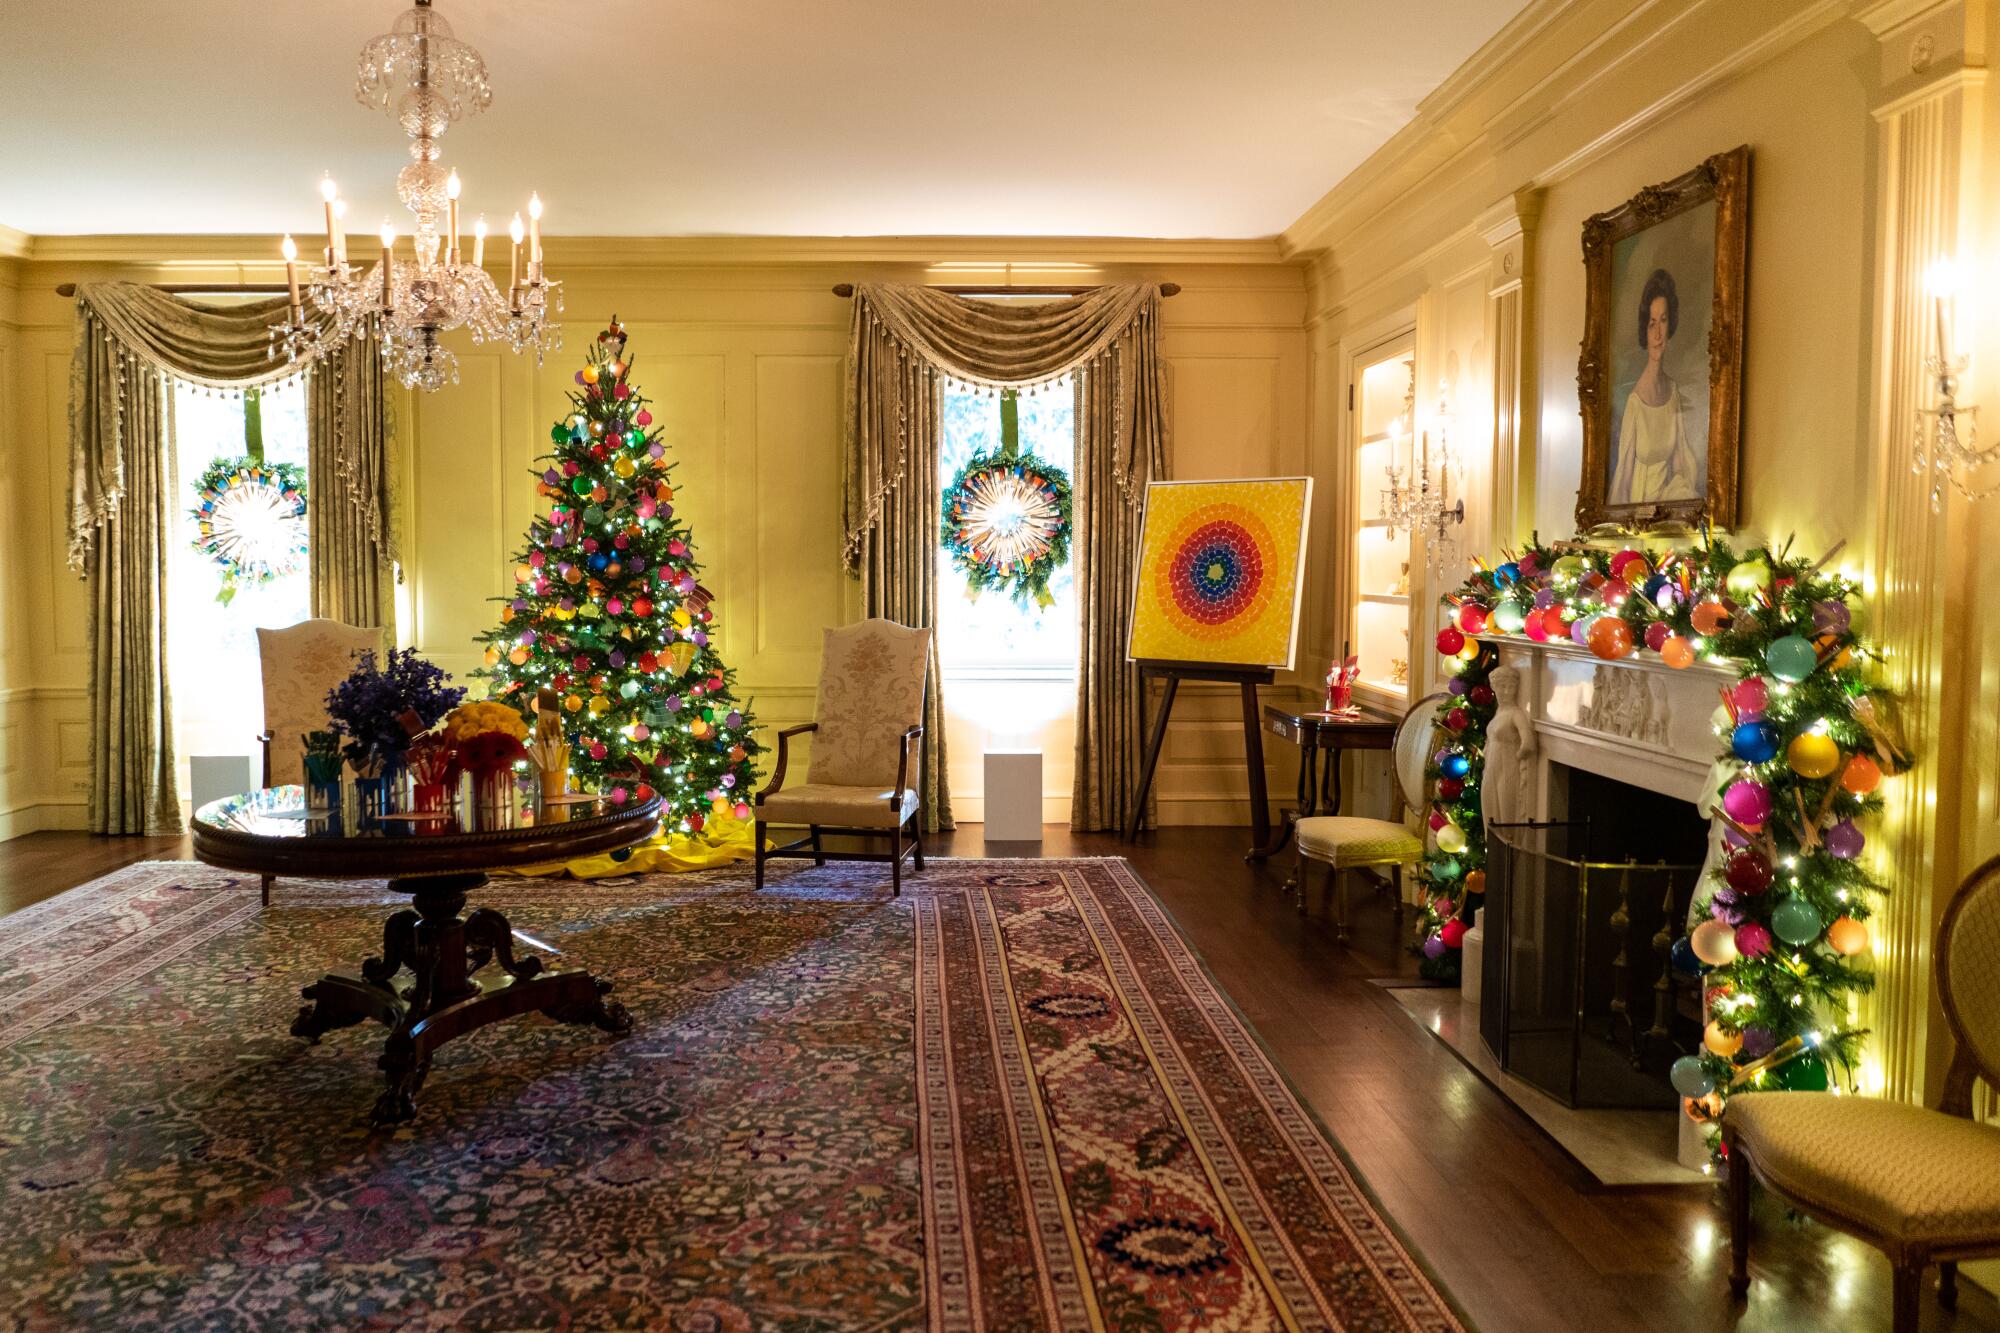 Christmas decorations adorn the Vermeil Room of the White House.